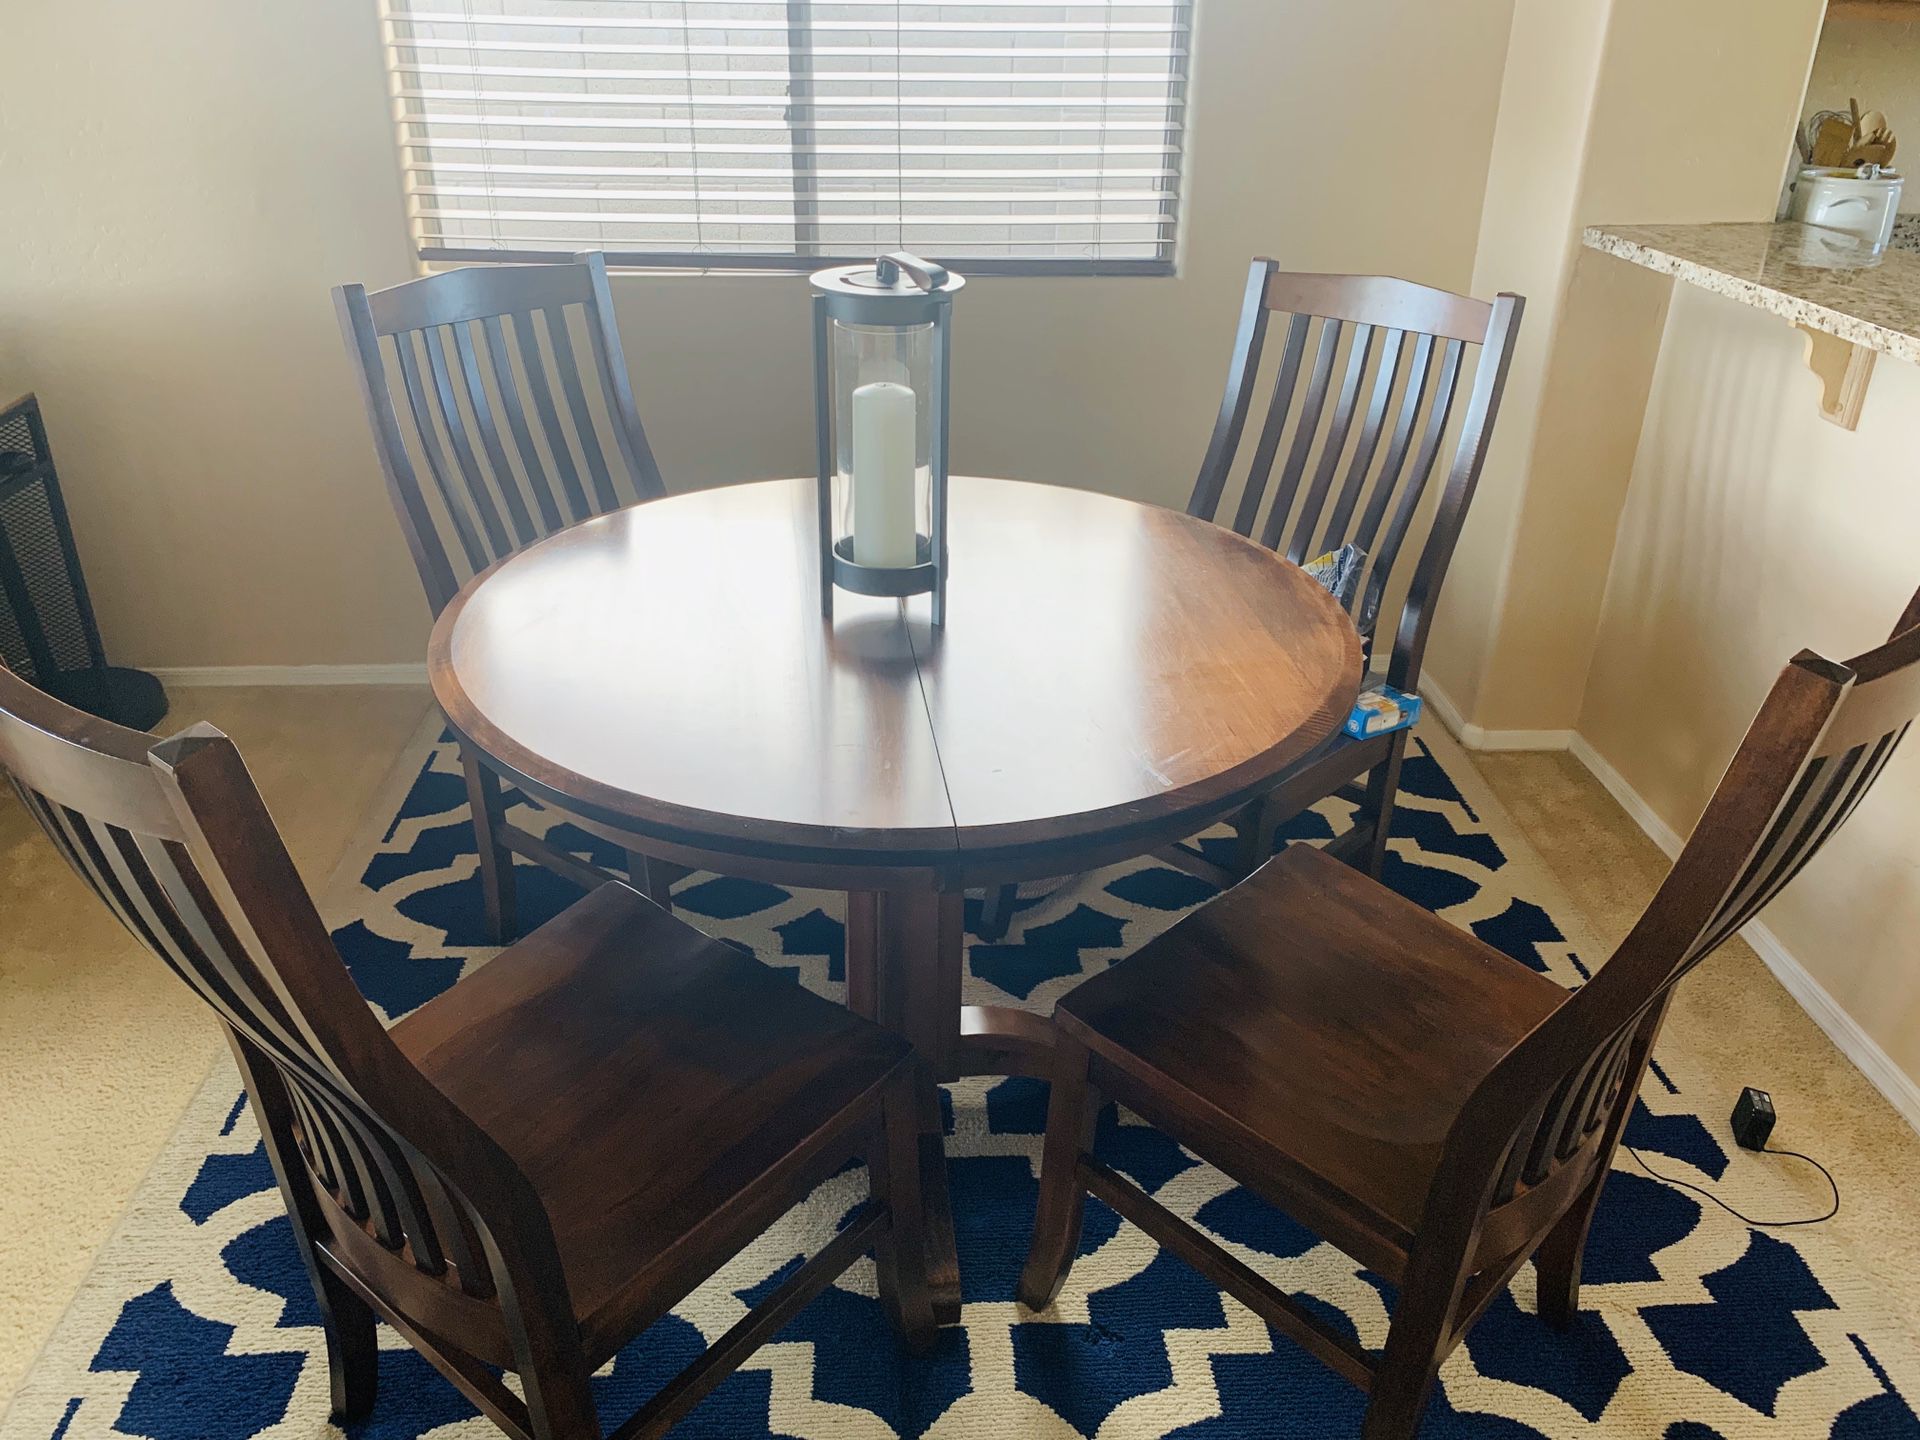 Cherry Table with leaf & 6 chairs total